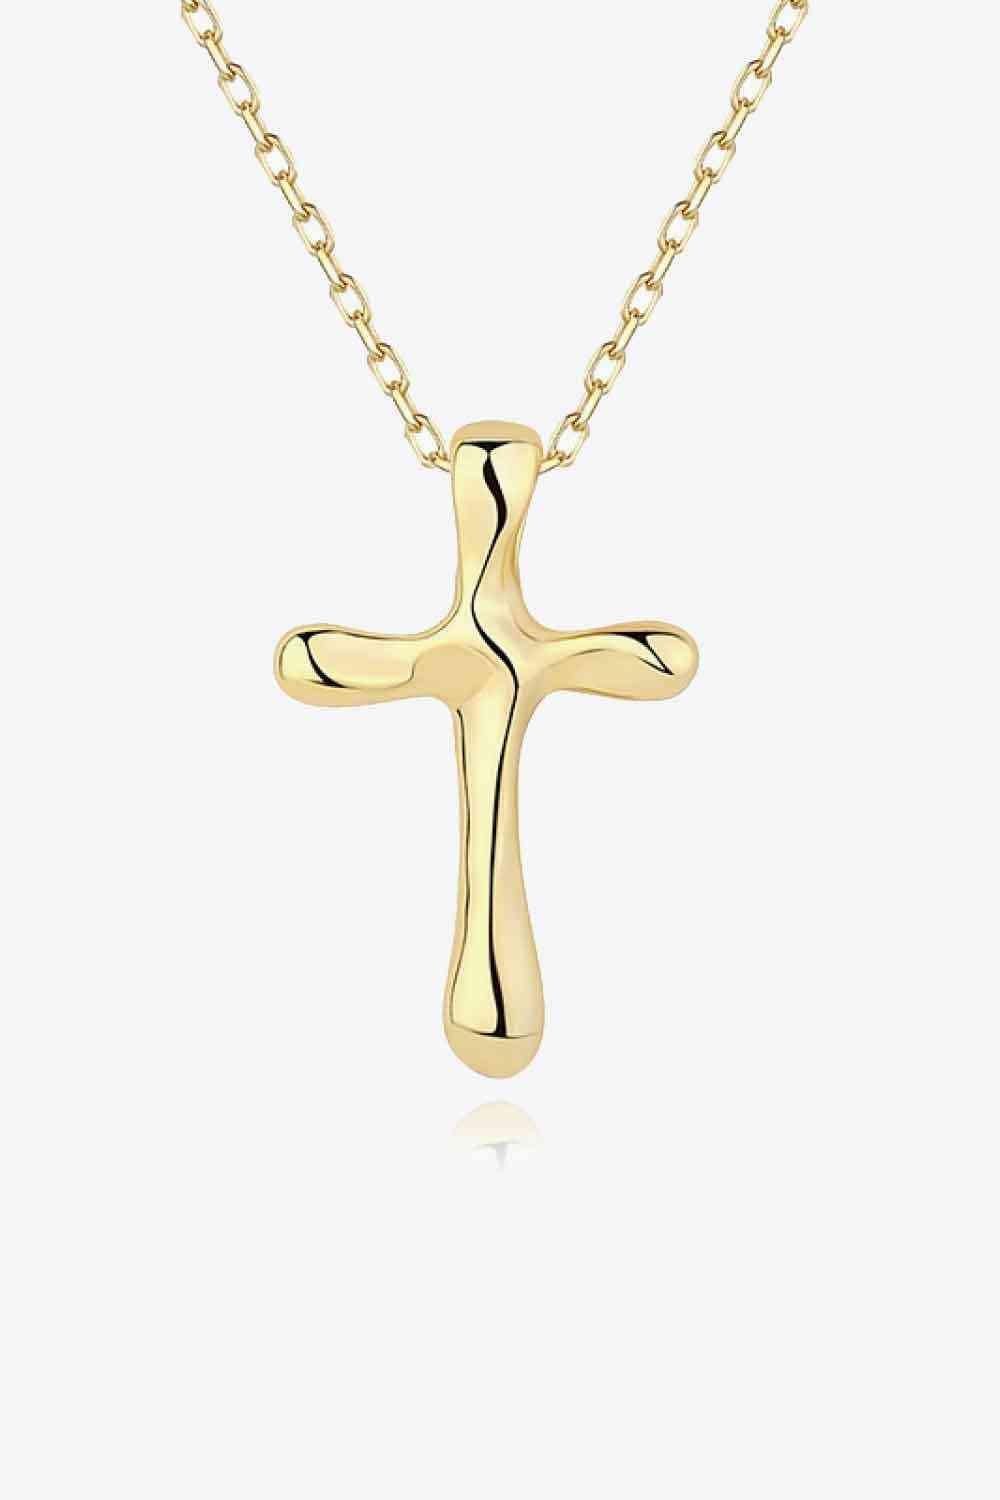 Cross Pendant 925 Sterling Silver Necklace - God's Girl Gifts And Apparel